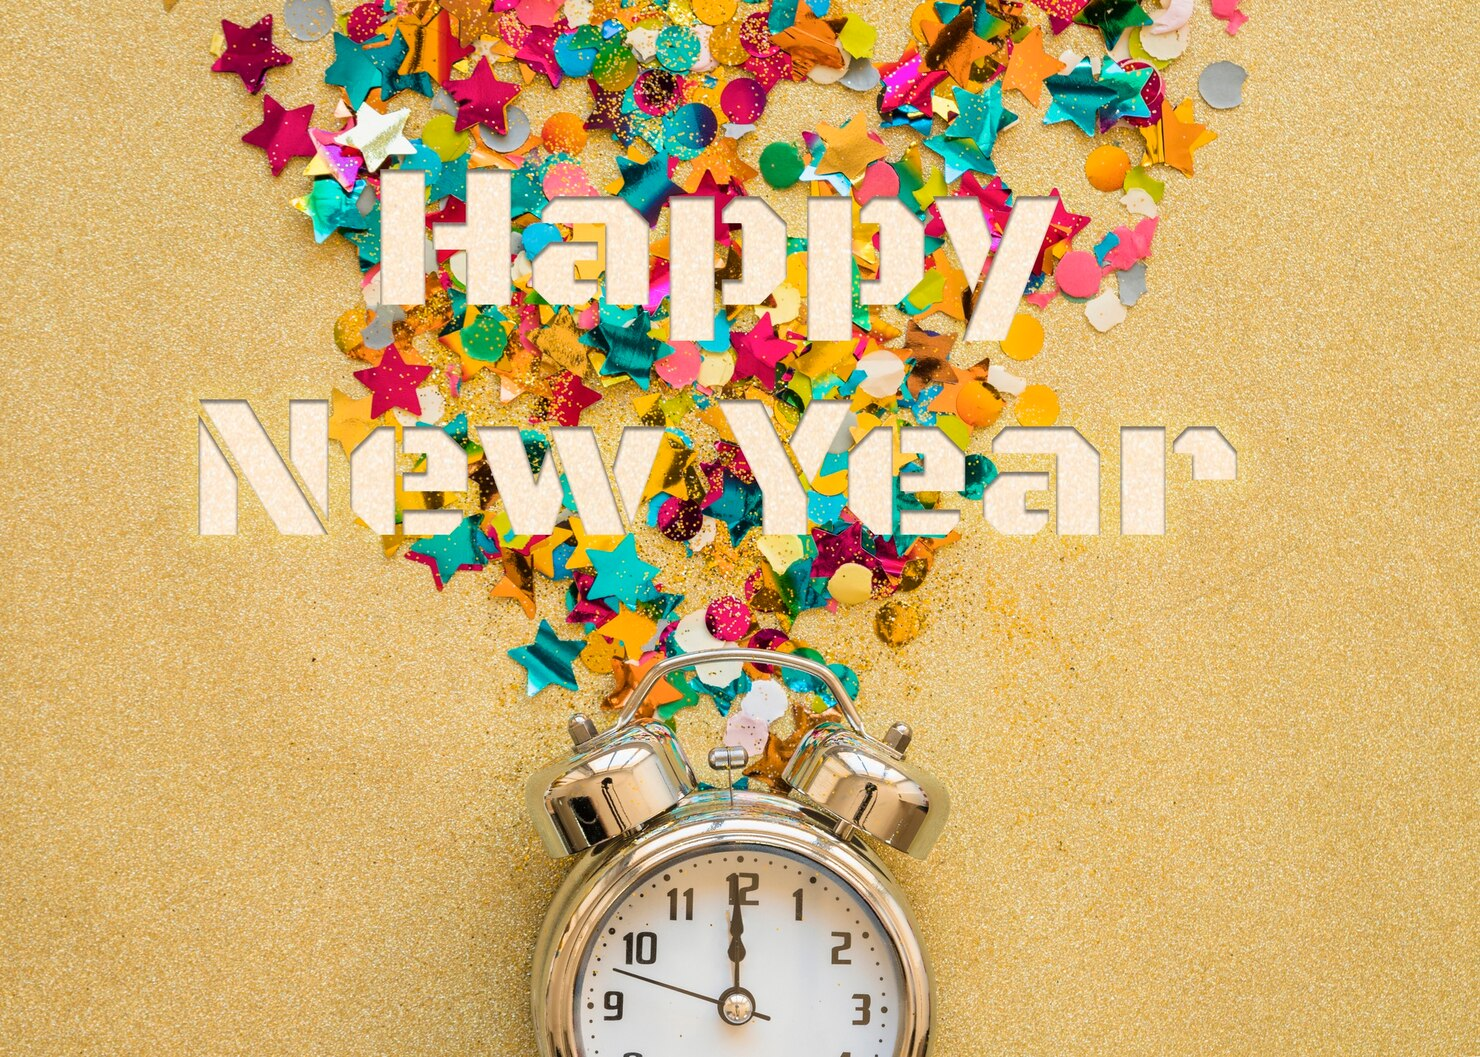 Happy New Year written in confetti with a clock striking midnight. 